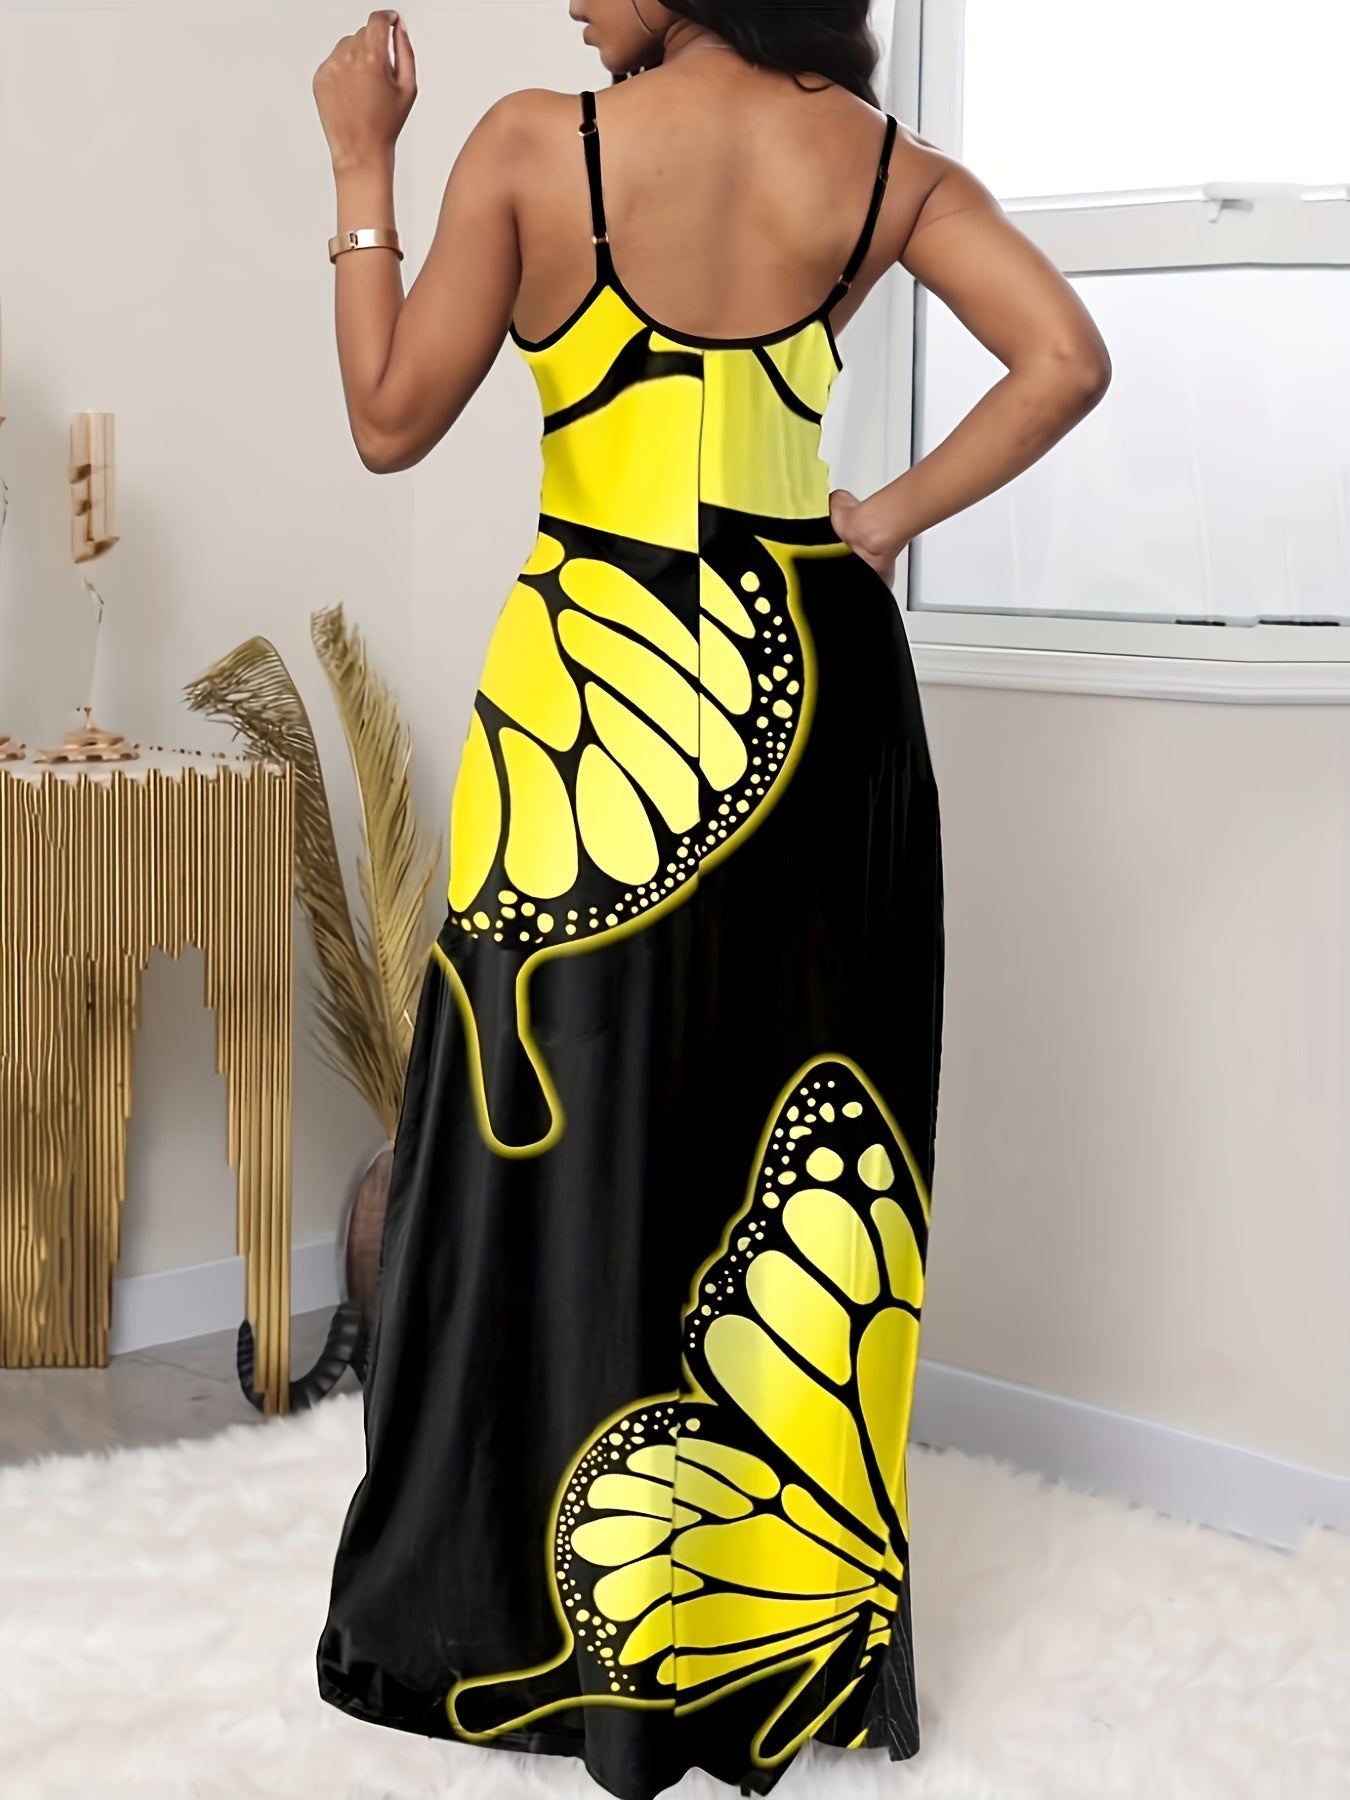 Fluttering Butterfly Print Backless Maxi Dress - Effortlessly Chic Spaghetti Strap Sleeveless Design - Womens Summer Clothing Must-Have